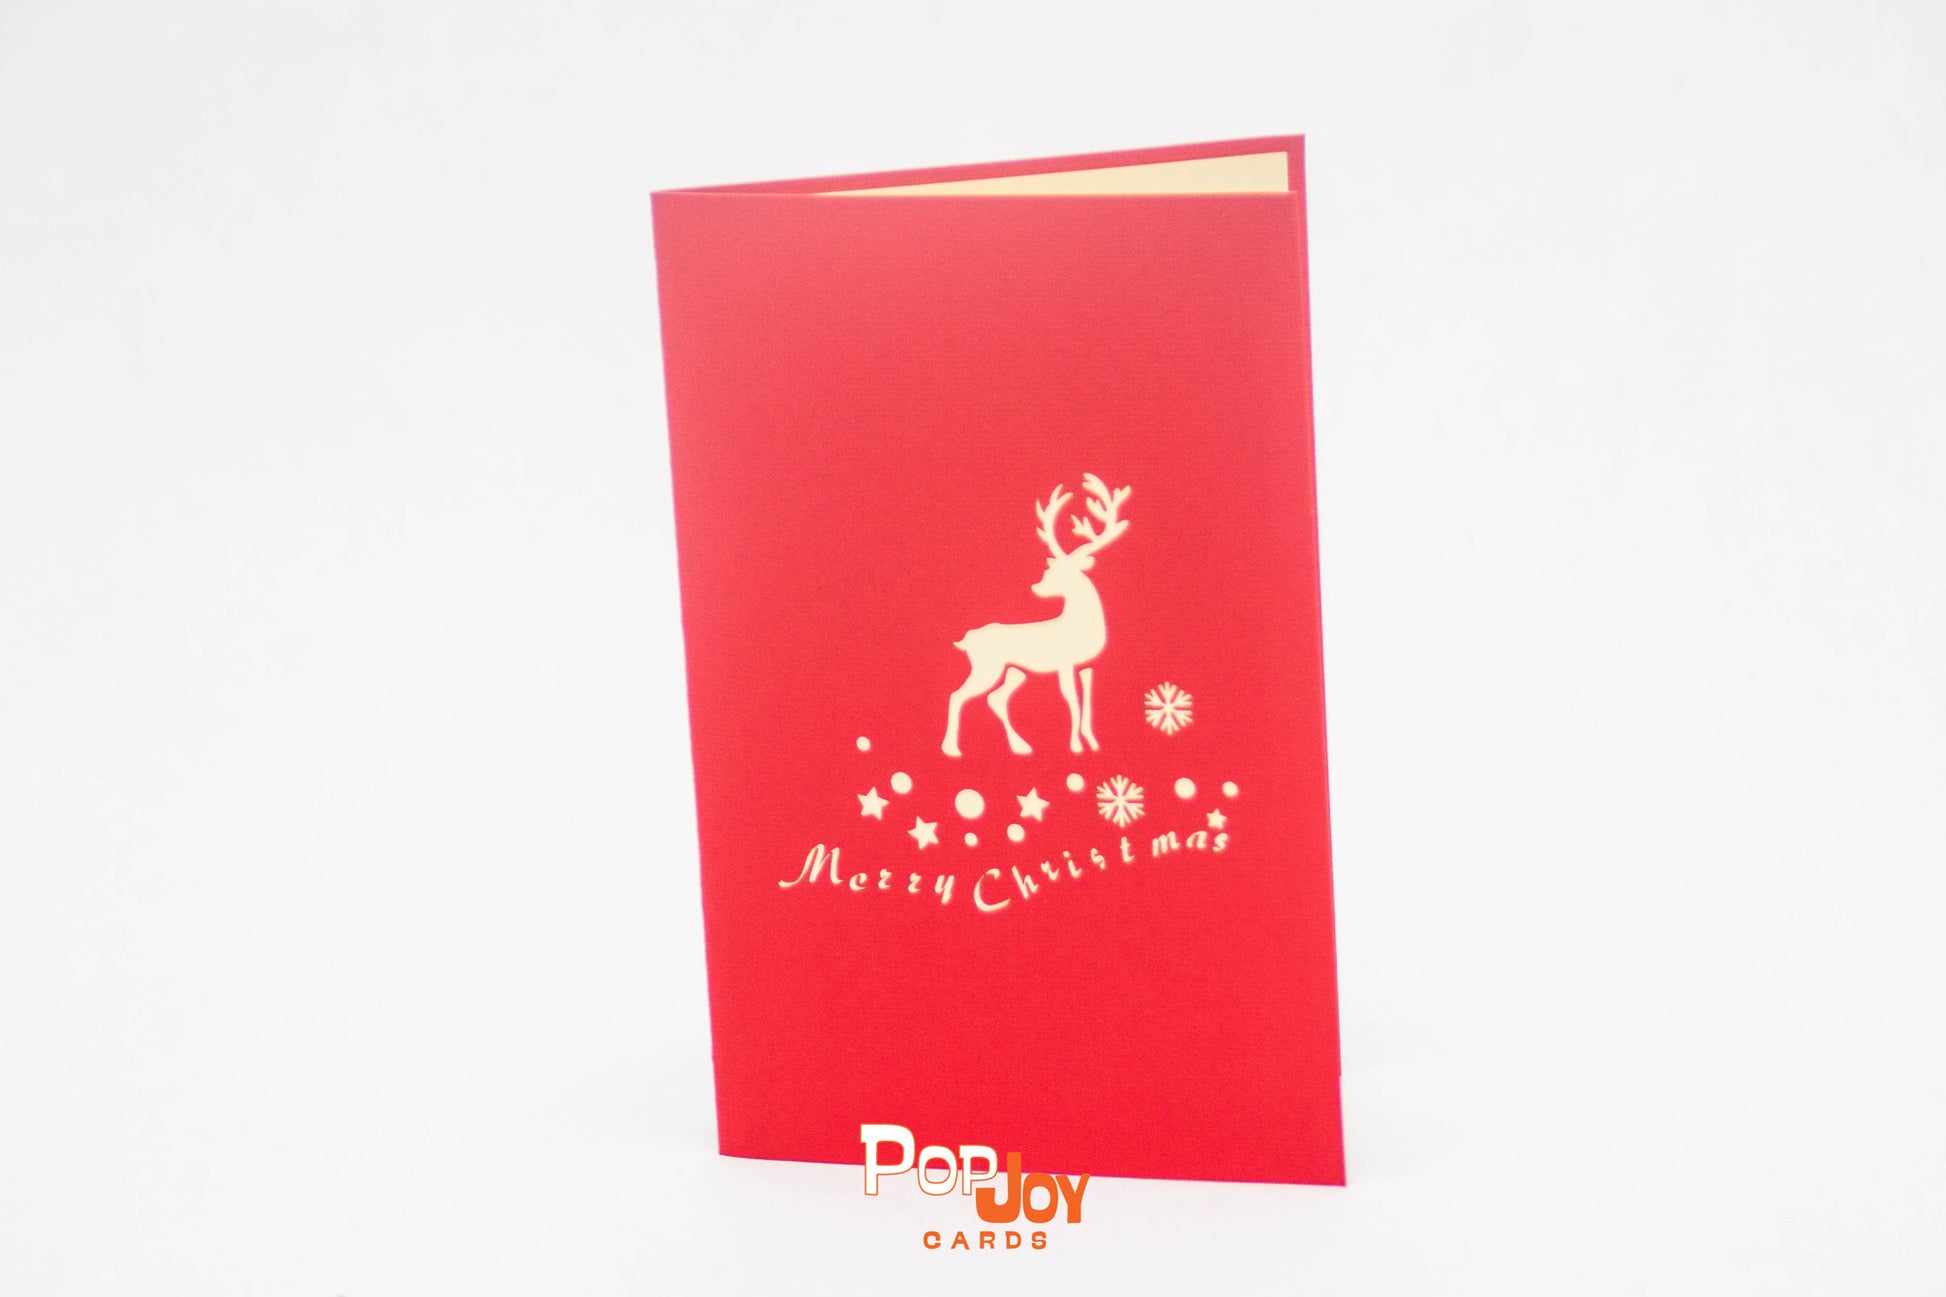 Red card with silhouette of reindeer, snow flakes and Merry Christmas on front cover